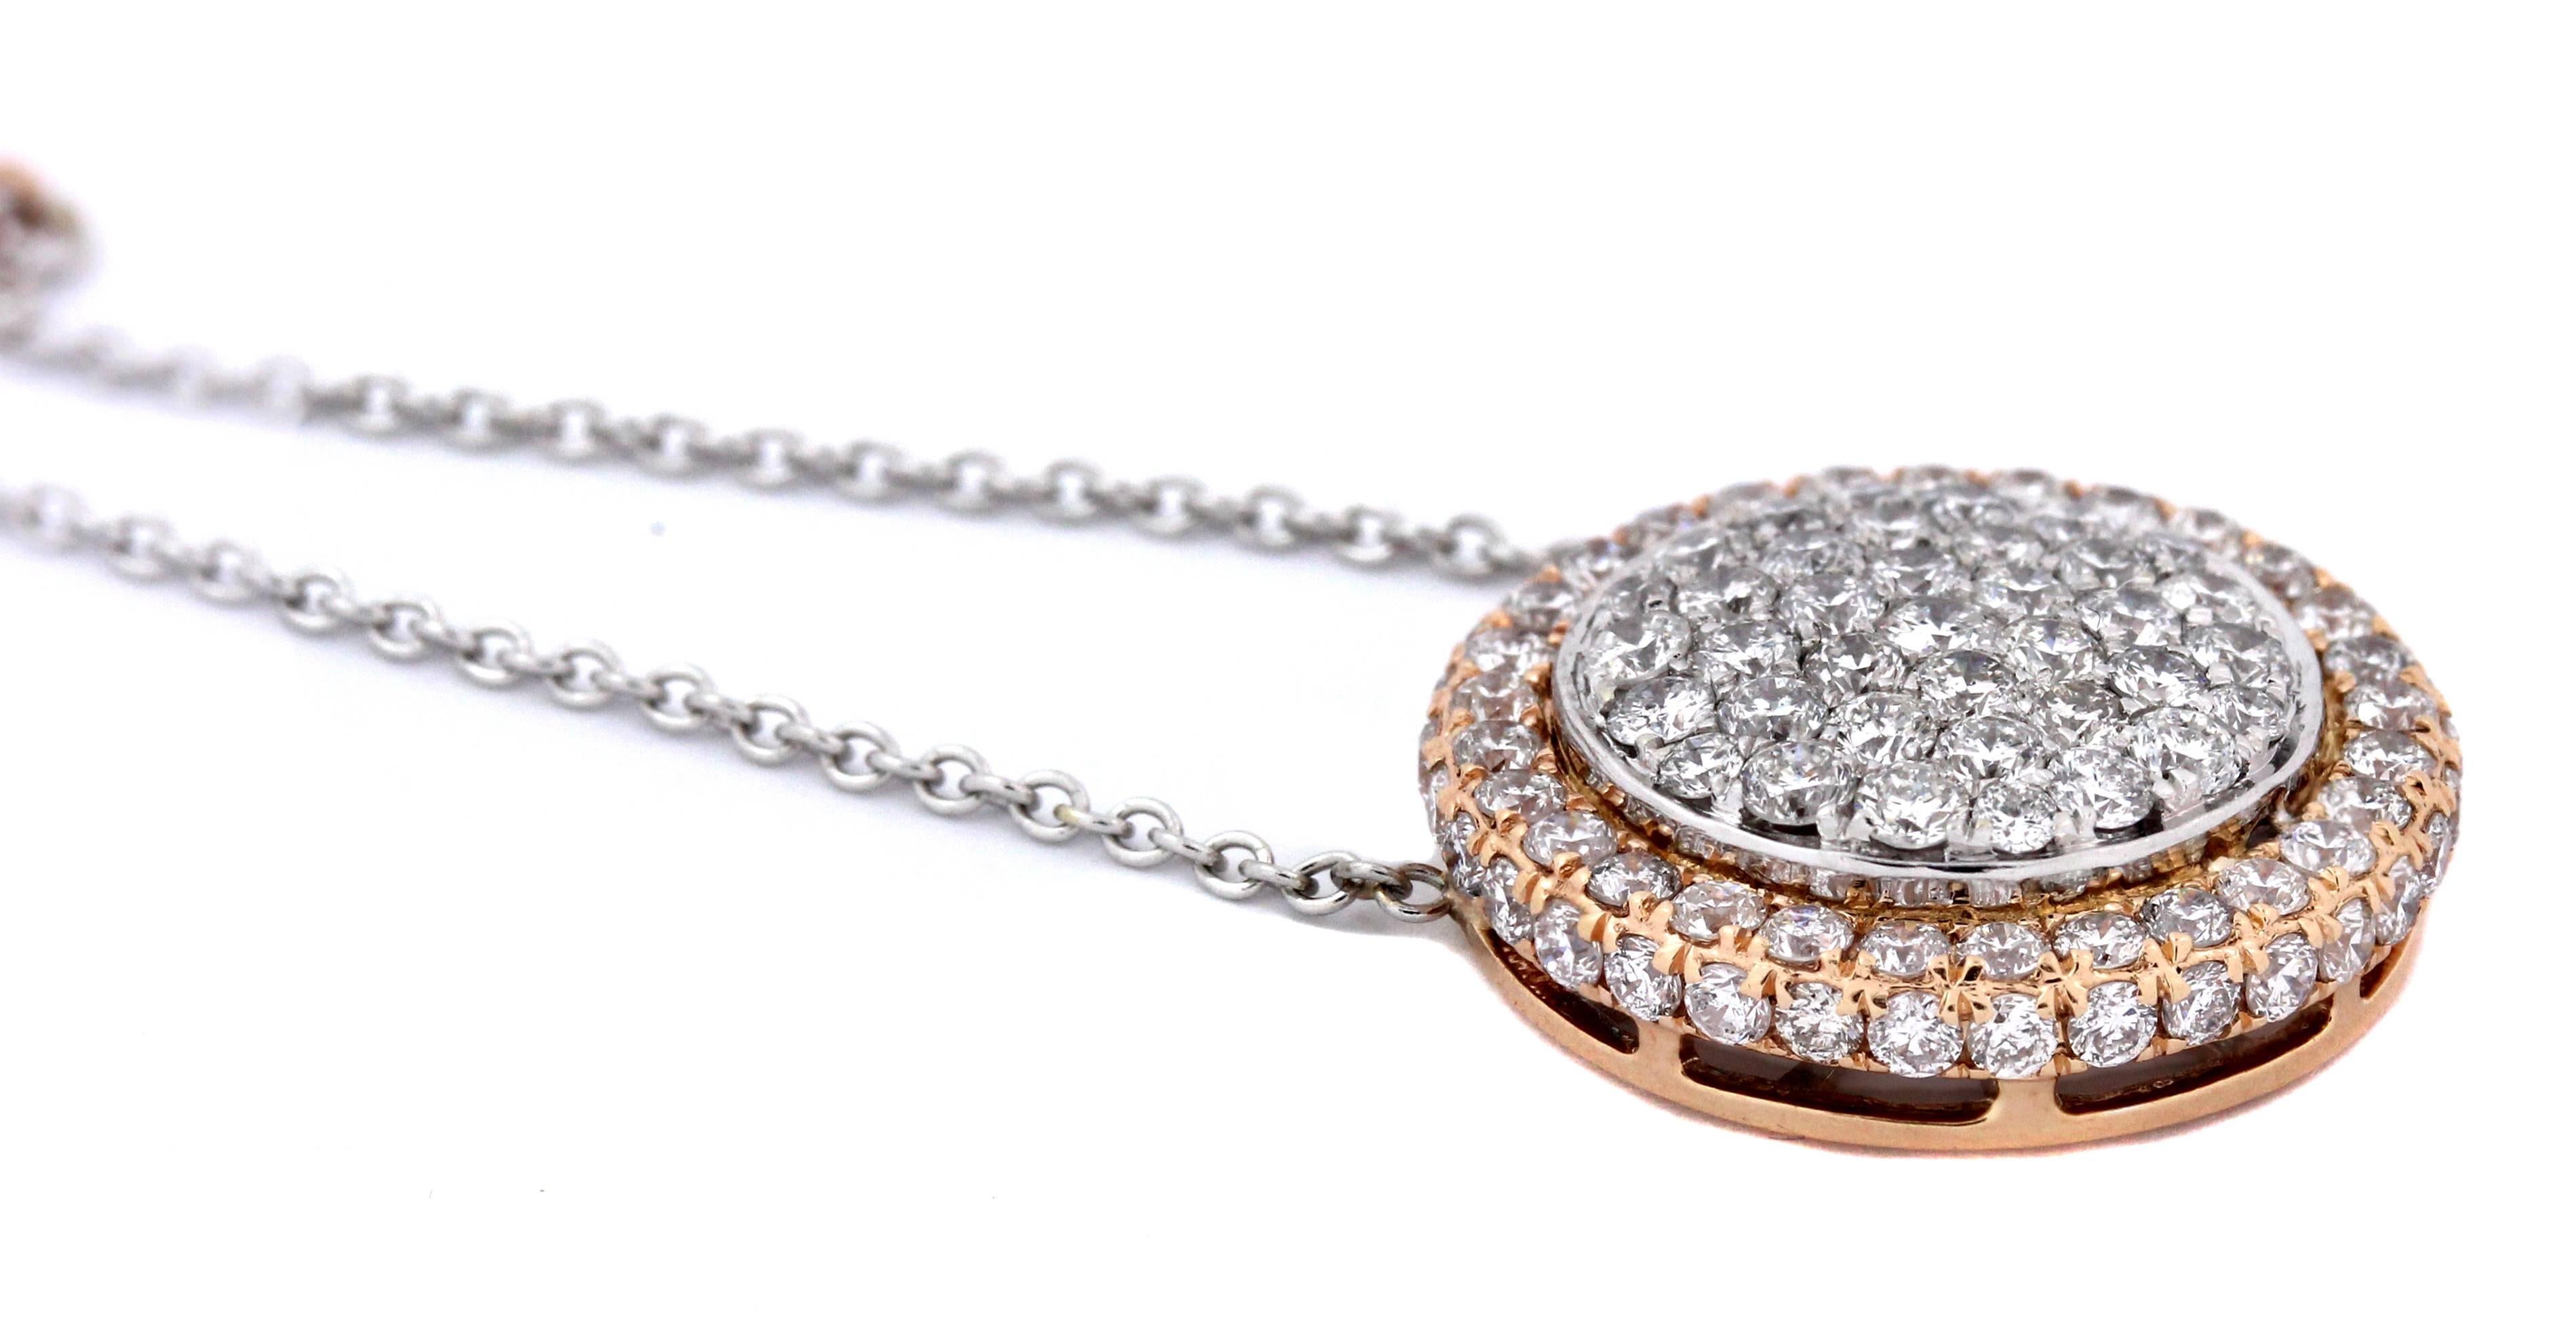 18K Rose and White Gold Diamond Pendant Necklace

Center is diamond pendant that is attached to chain. Diamonds cover the pendant entirely with white gold center surrounded by rose gold.

Center pendant has 1.50ct. in H Color SI Clarity Diamonds.